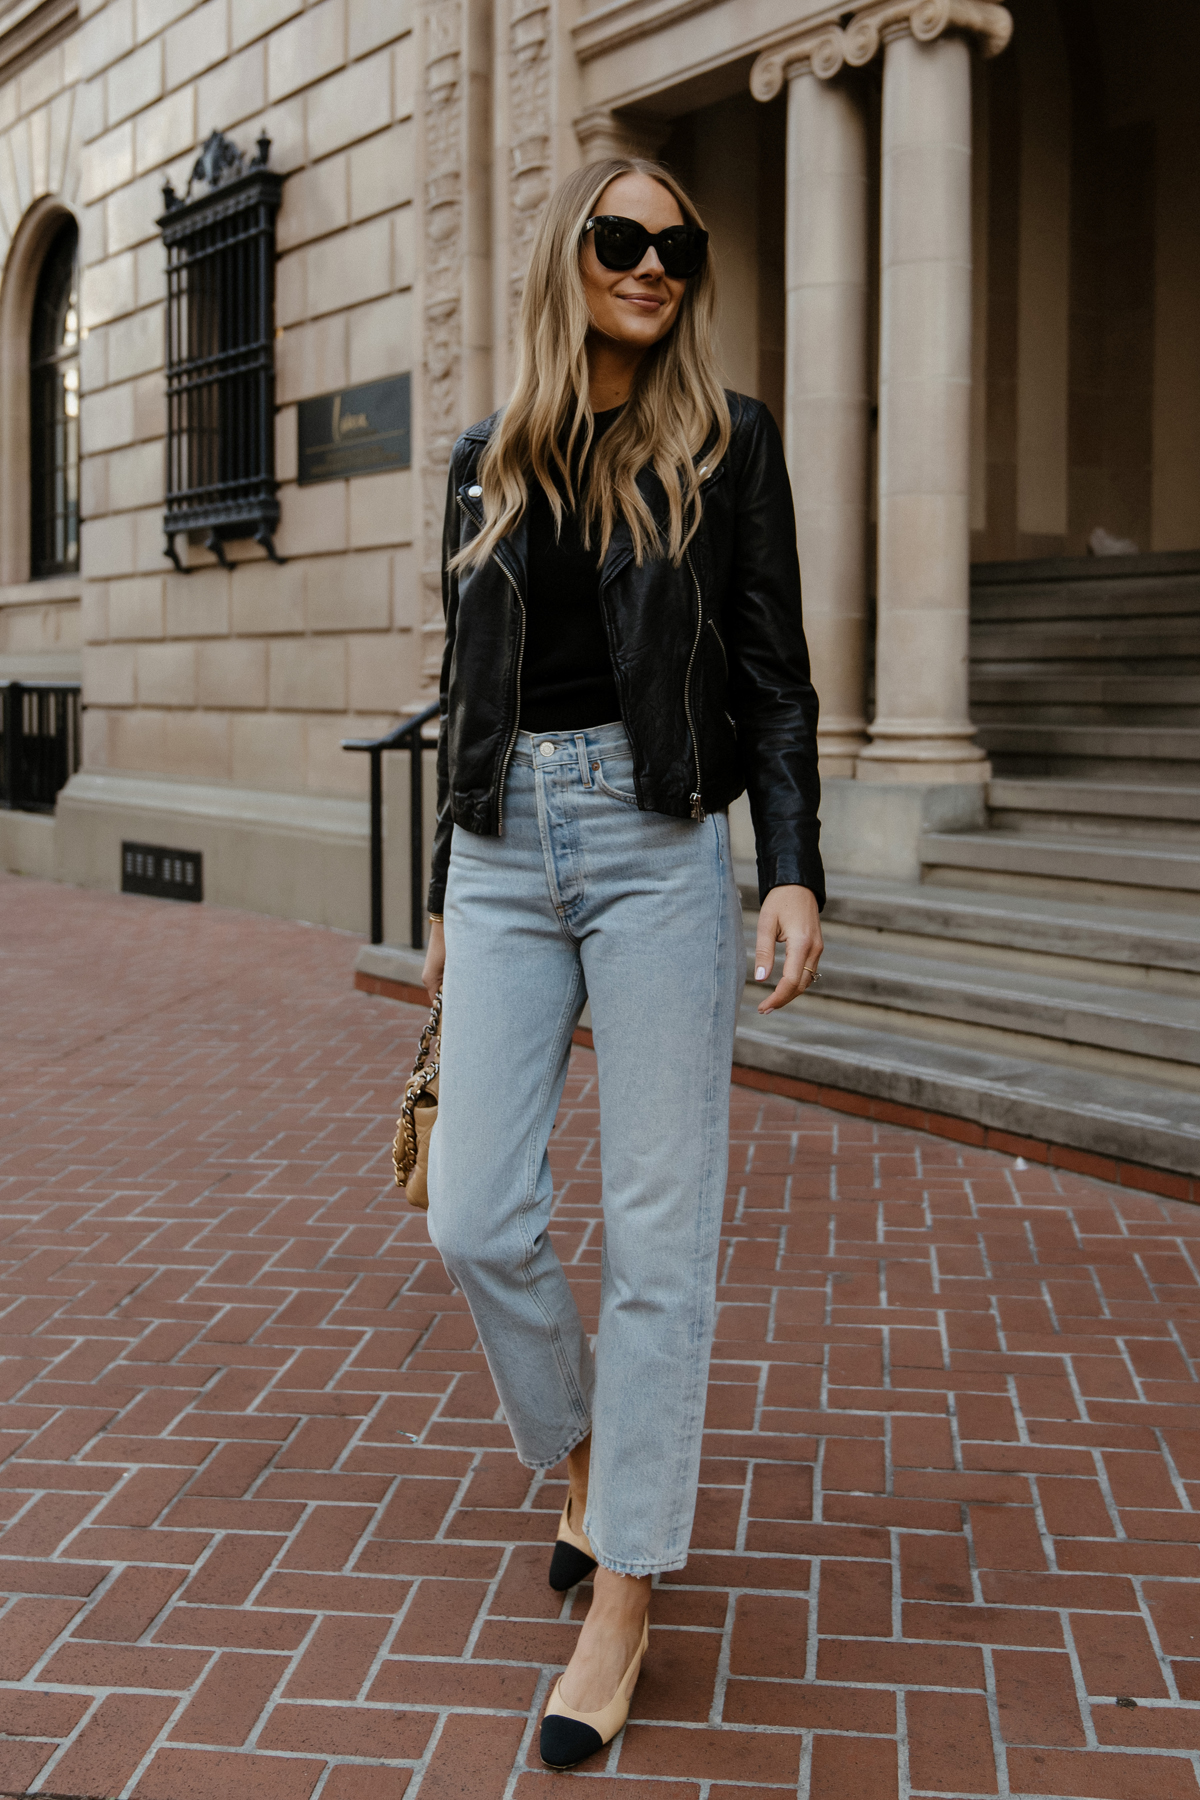 Fashion Jackson Wearing Madewell Black Leather Jacket AGOLDE 90s Jeans Outfit Womens Black Leather Jacket Outfit Chanel Slingbacks Street Style 1